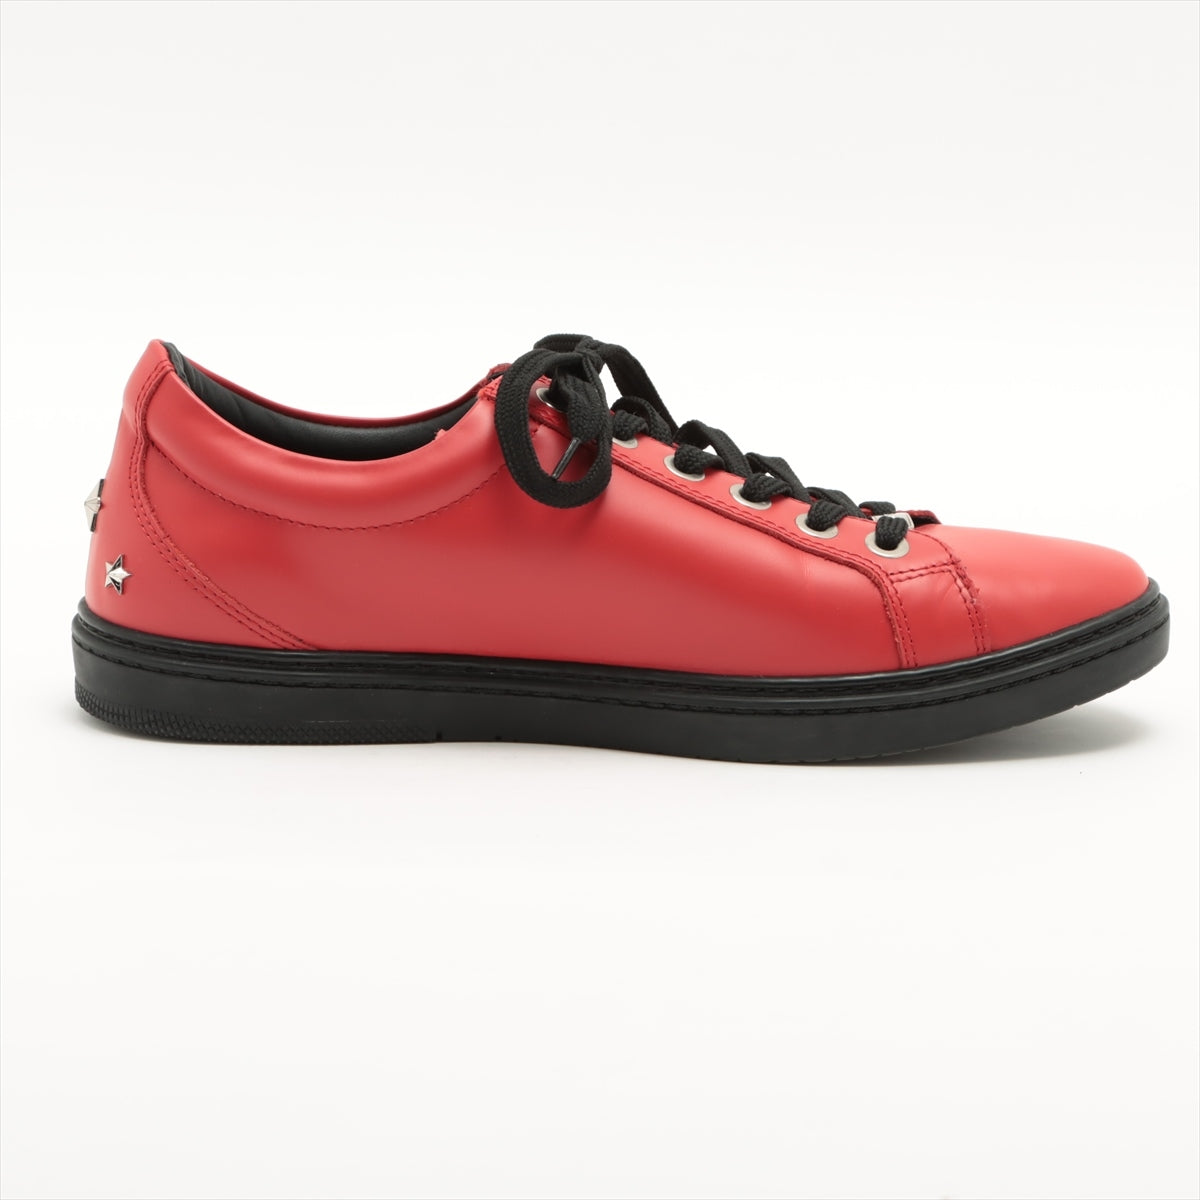 Jimmy Choo Leather Sneakers 43 Men's Red Star studs